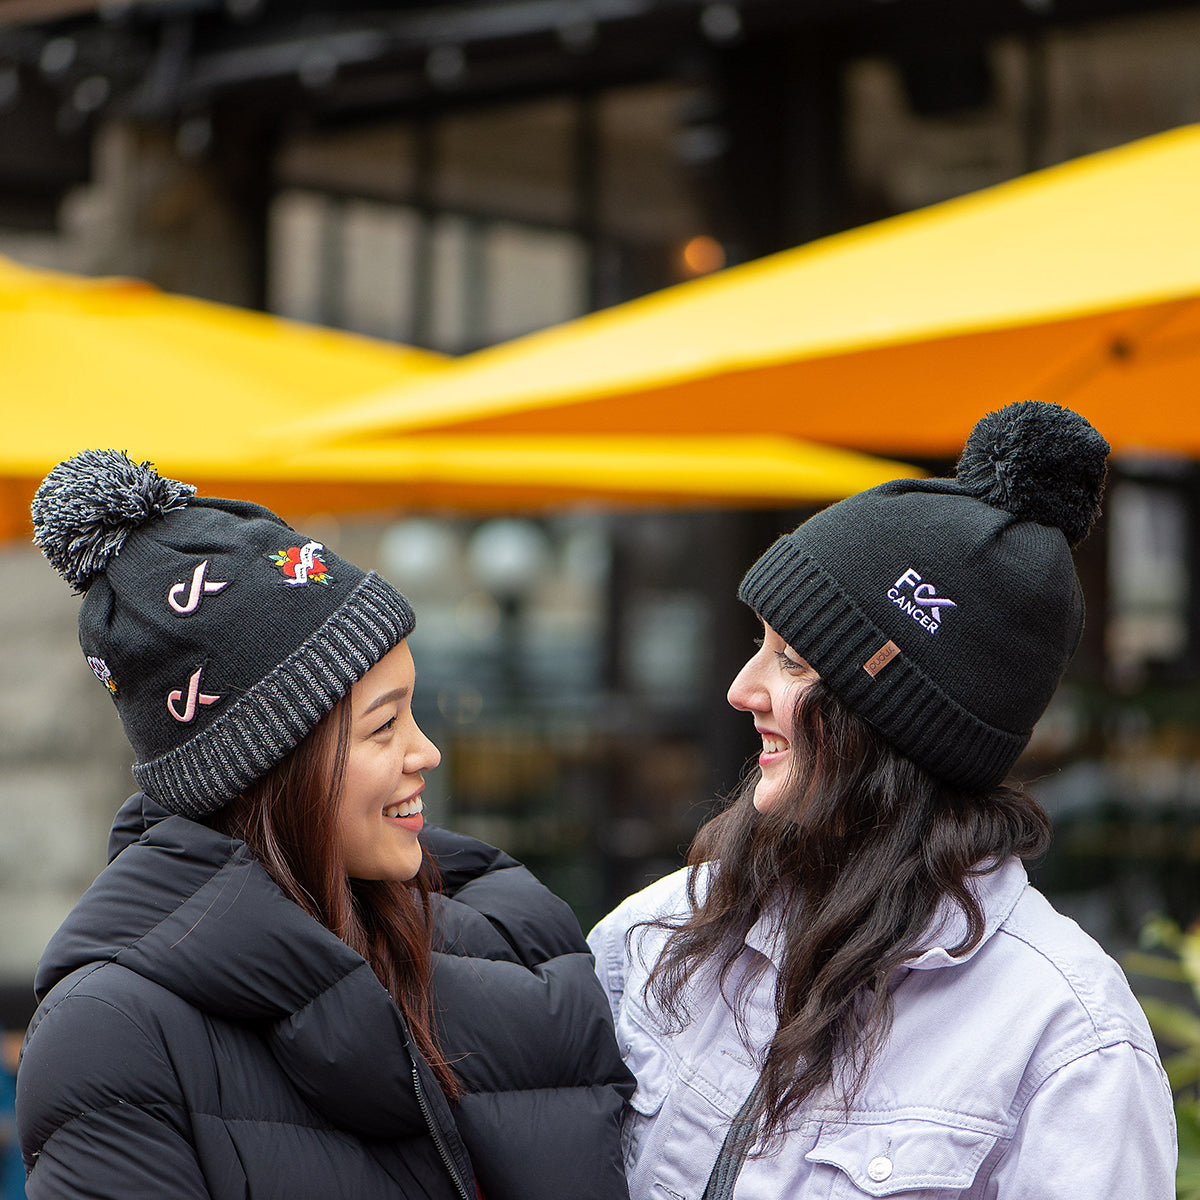 F Cancer x Pudus Beanie Hat | Multi Patch